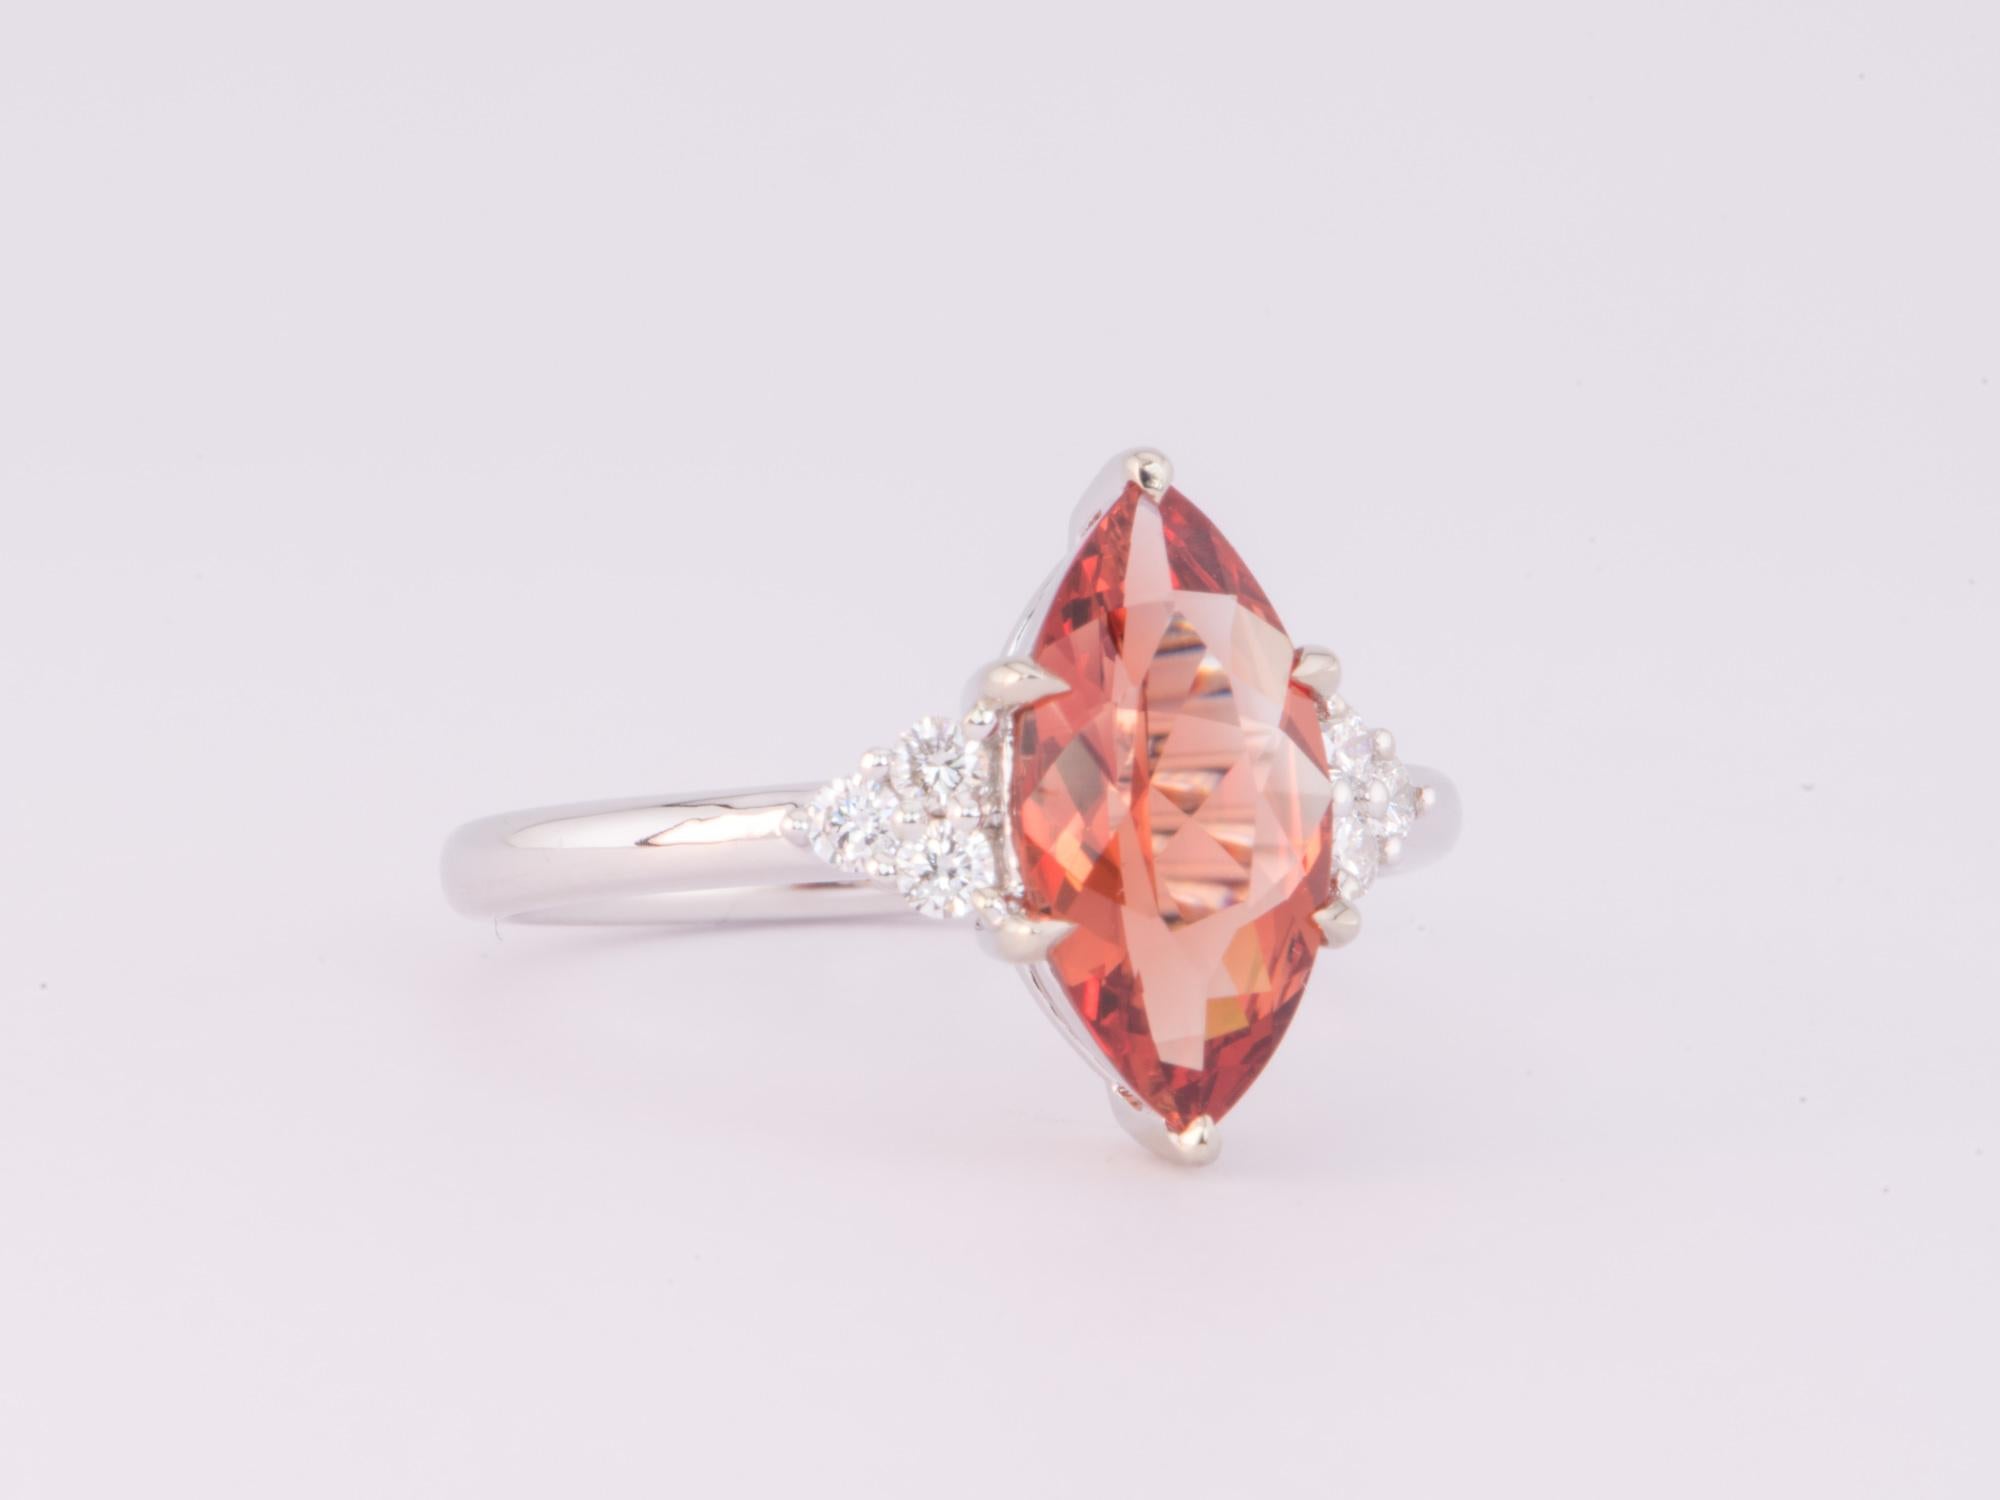 ♥ The item measures 14mm in length, 14mm in width, and stands 5mm tall from the finger. Band width is 2mm.
♥ Ring size: US Size 7 (Free resizing up or down 2 sizes)
♥ Material: 14K White Gold
♥ Gemstone: Sunstone, 1.69ct; earth-mined diamonds, 0.17ct